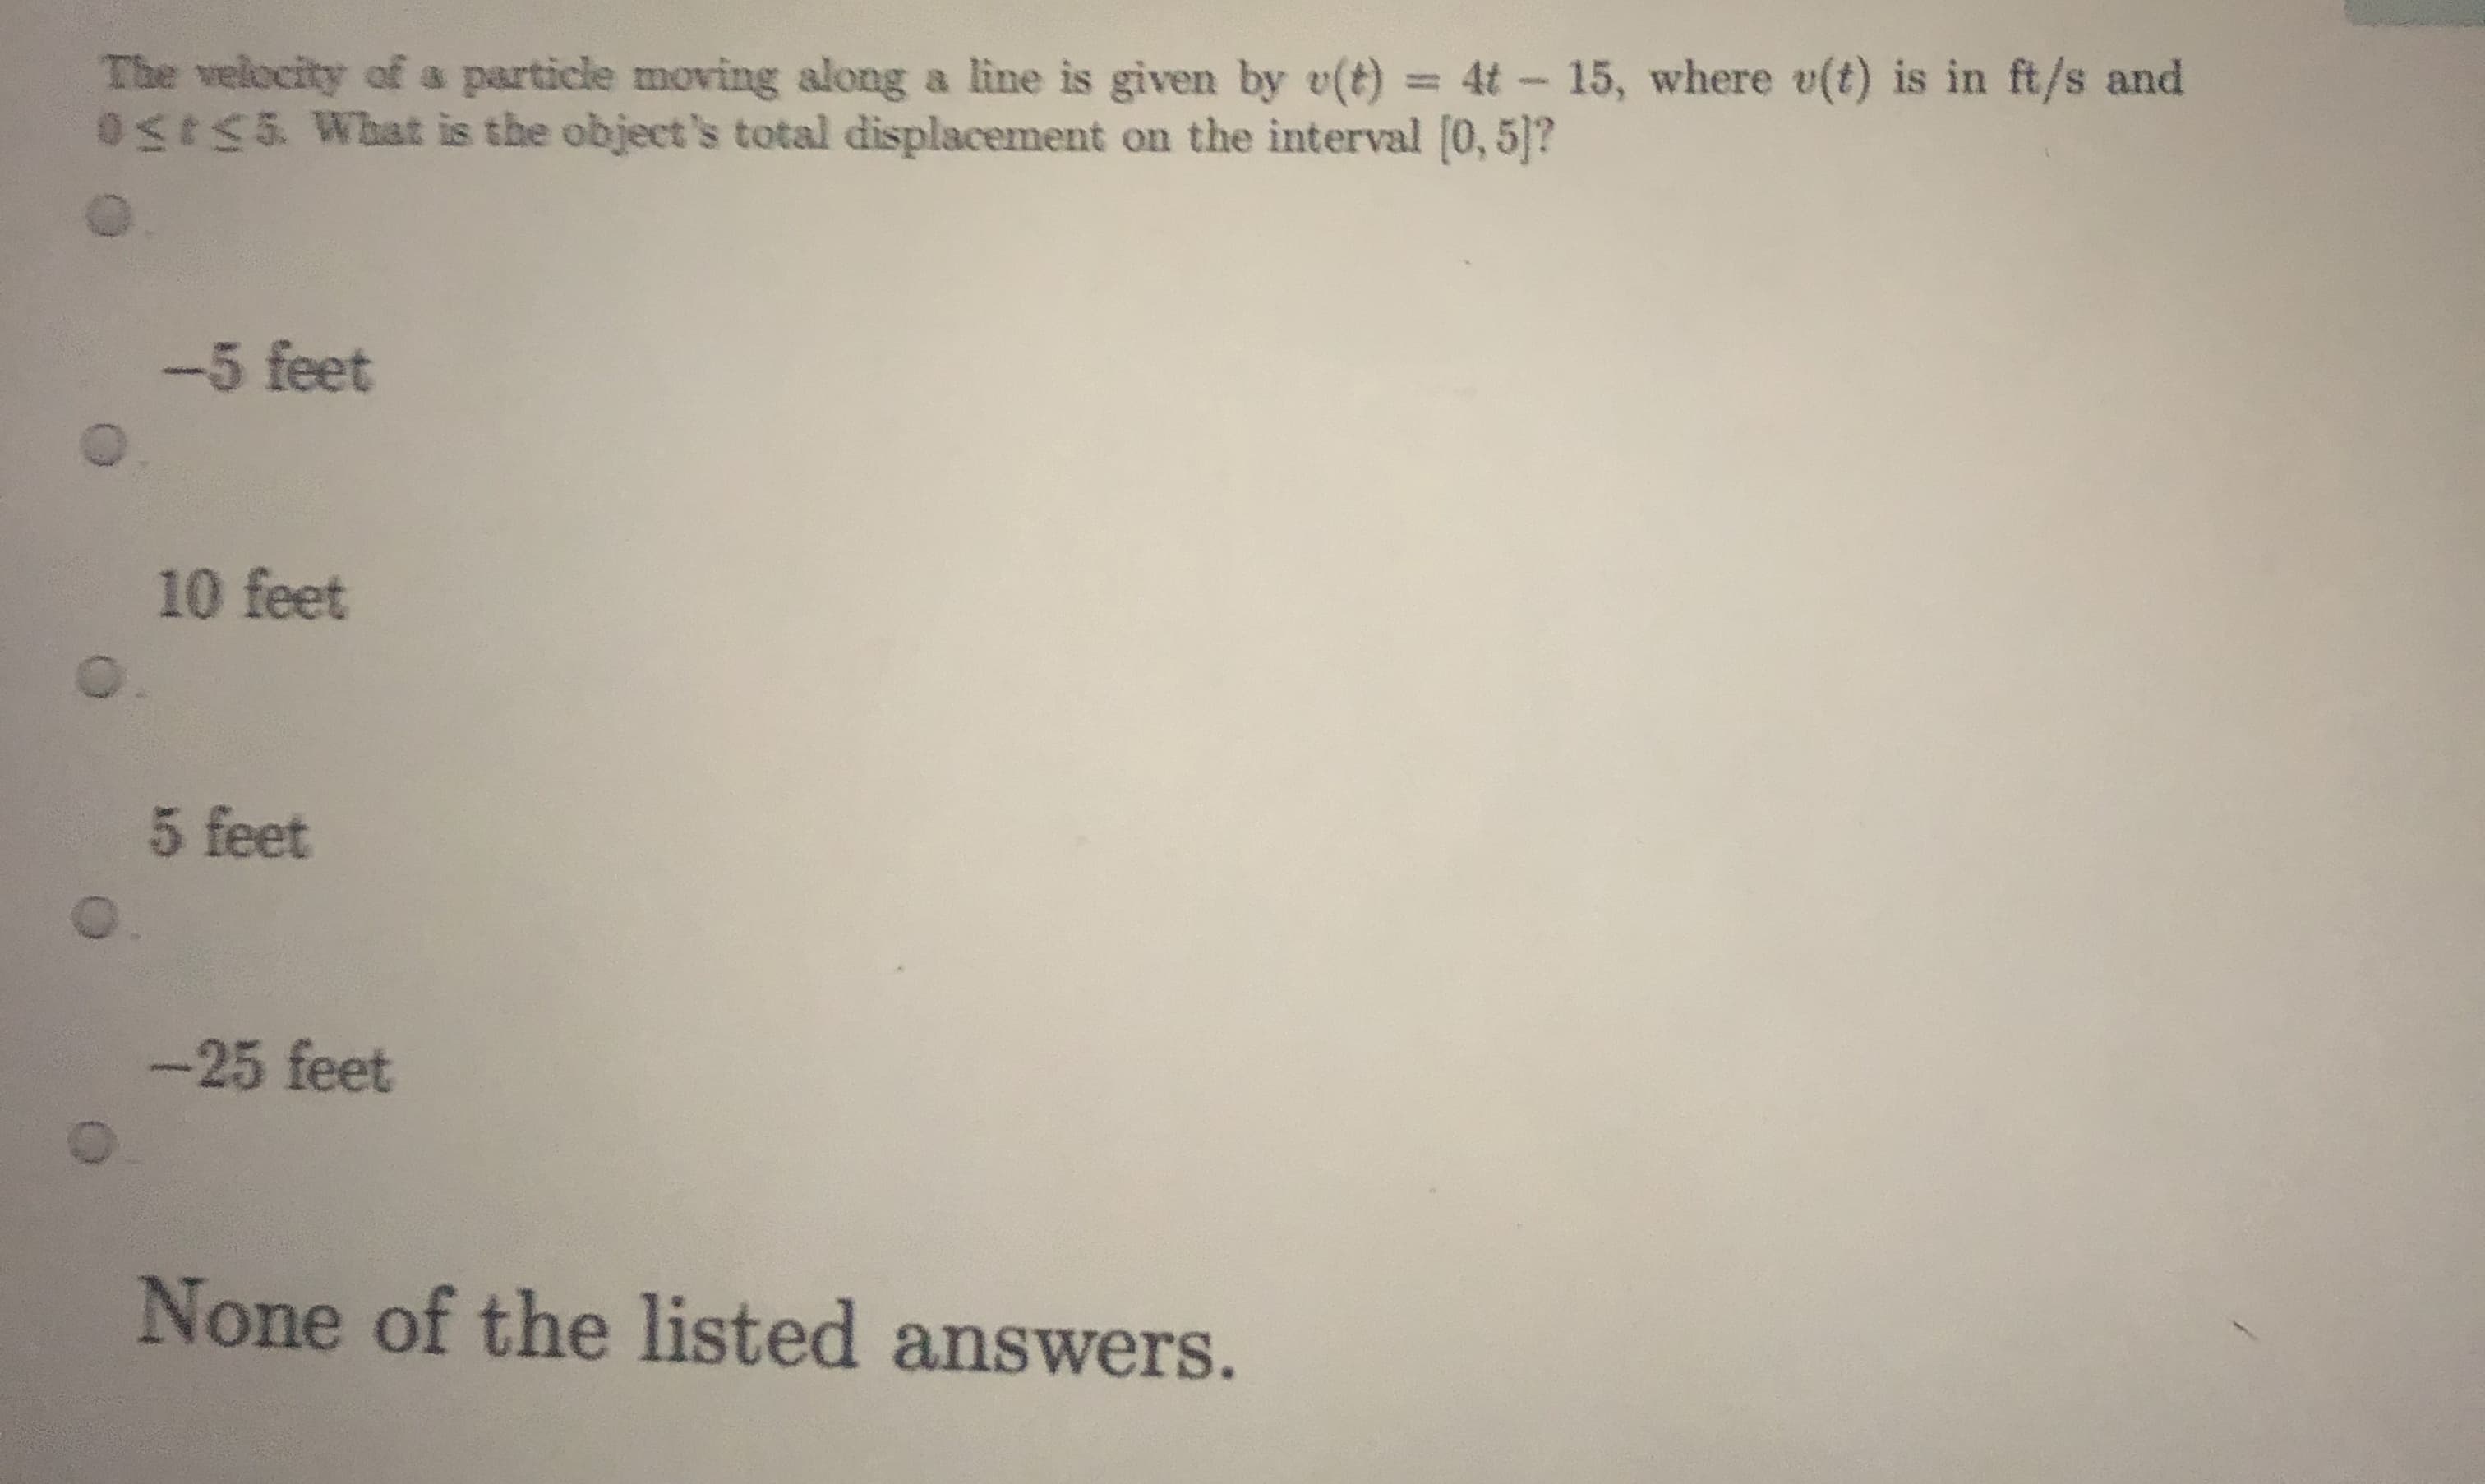 The velocity of a particle moving along a line is given by e(t) = 4t - 15, where v(t) is in ft/s and
0S55 What is the object's total displacement on the interval [0, 5]?
%3D
-5 feet
10 feet
5 feet
-25 feet
None of the listed answers.
